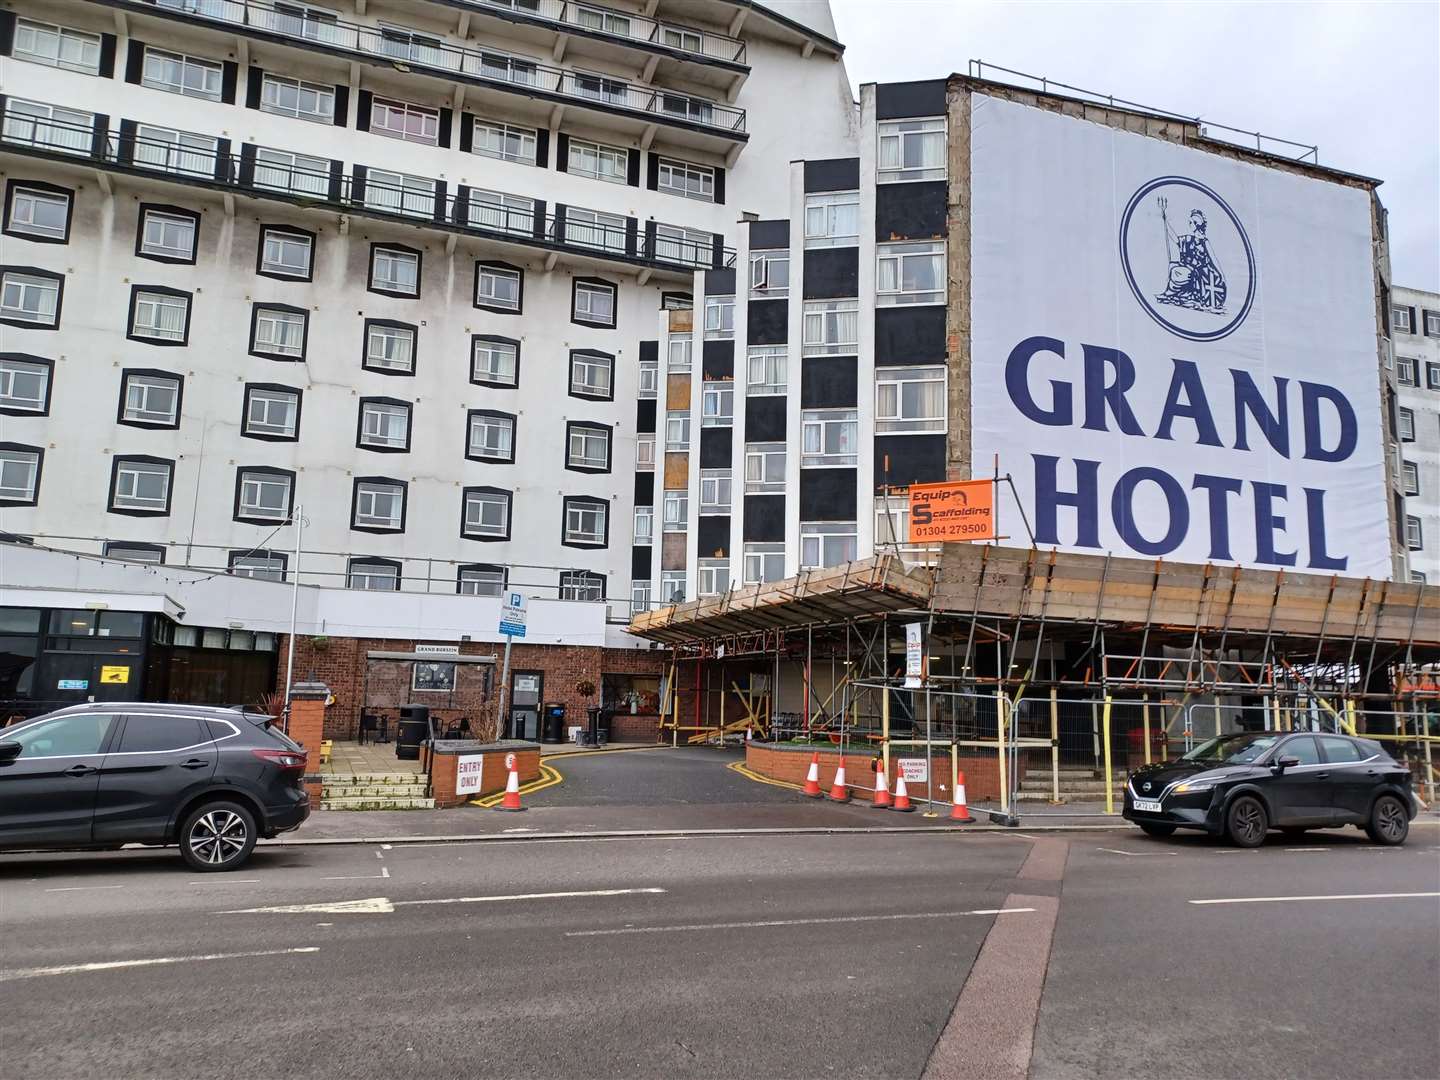 A huge material banner carrying the name Grand Hotel appeared over the damaged frontage, where the Grand Burstin sign previously appeared